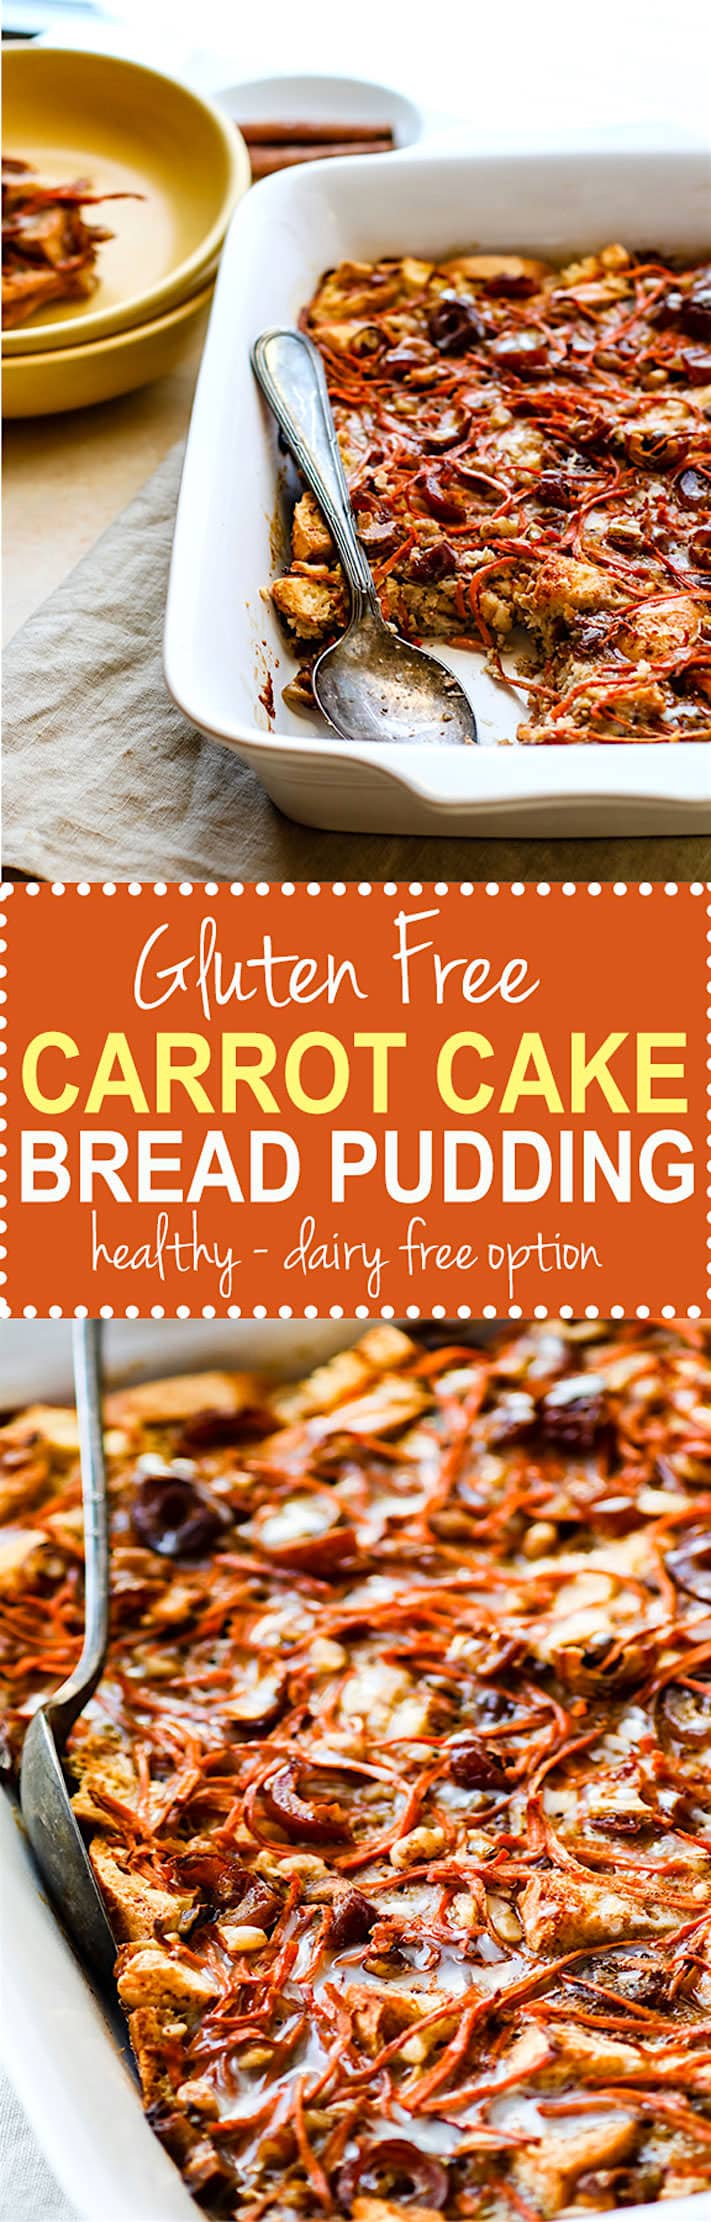 gluten free carrot cake bread pudding casserole. EASY to Make ahead! A Healthier gluten free carrot cake recipe in breakfast form and dairy free! @cottercrunch